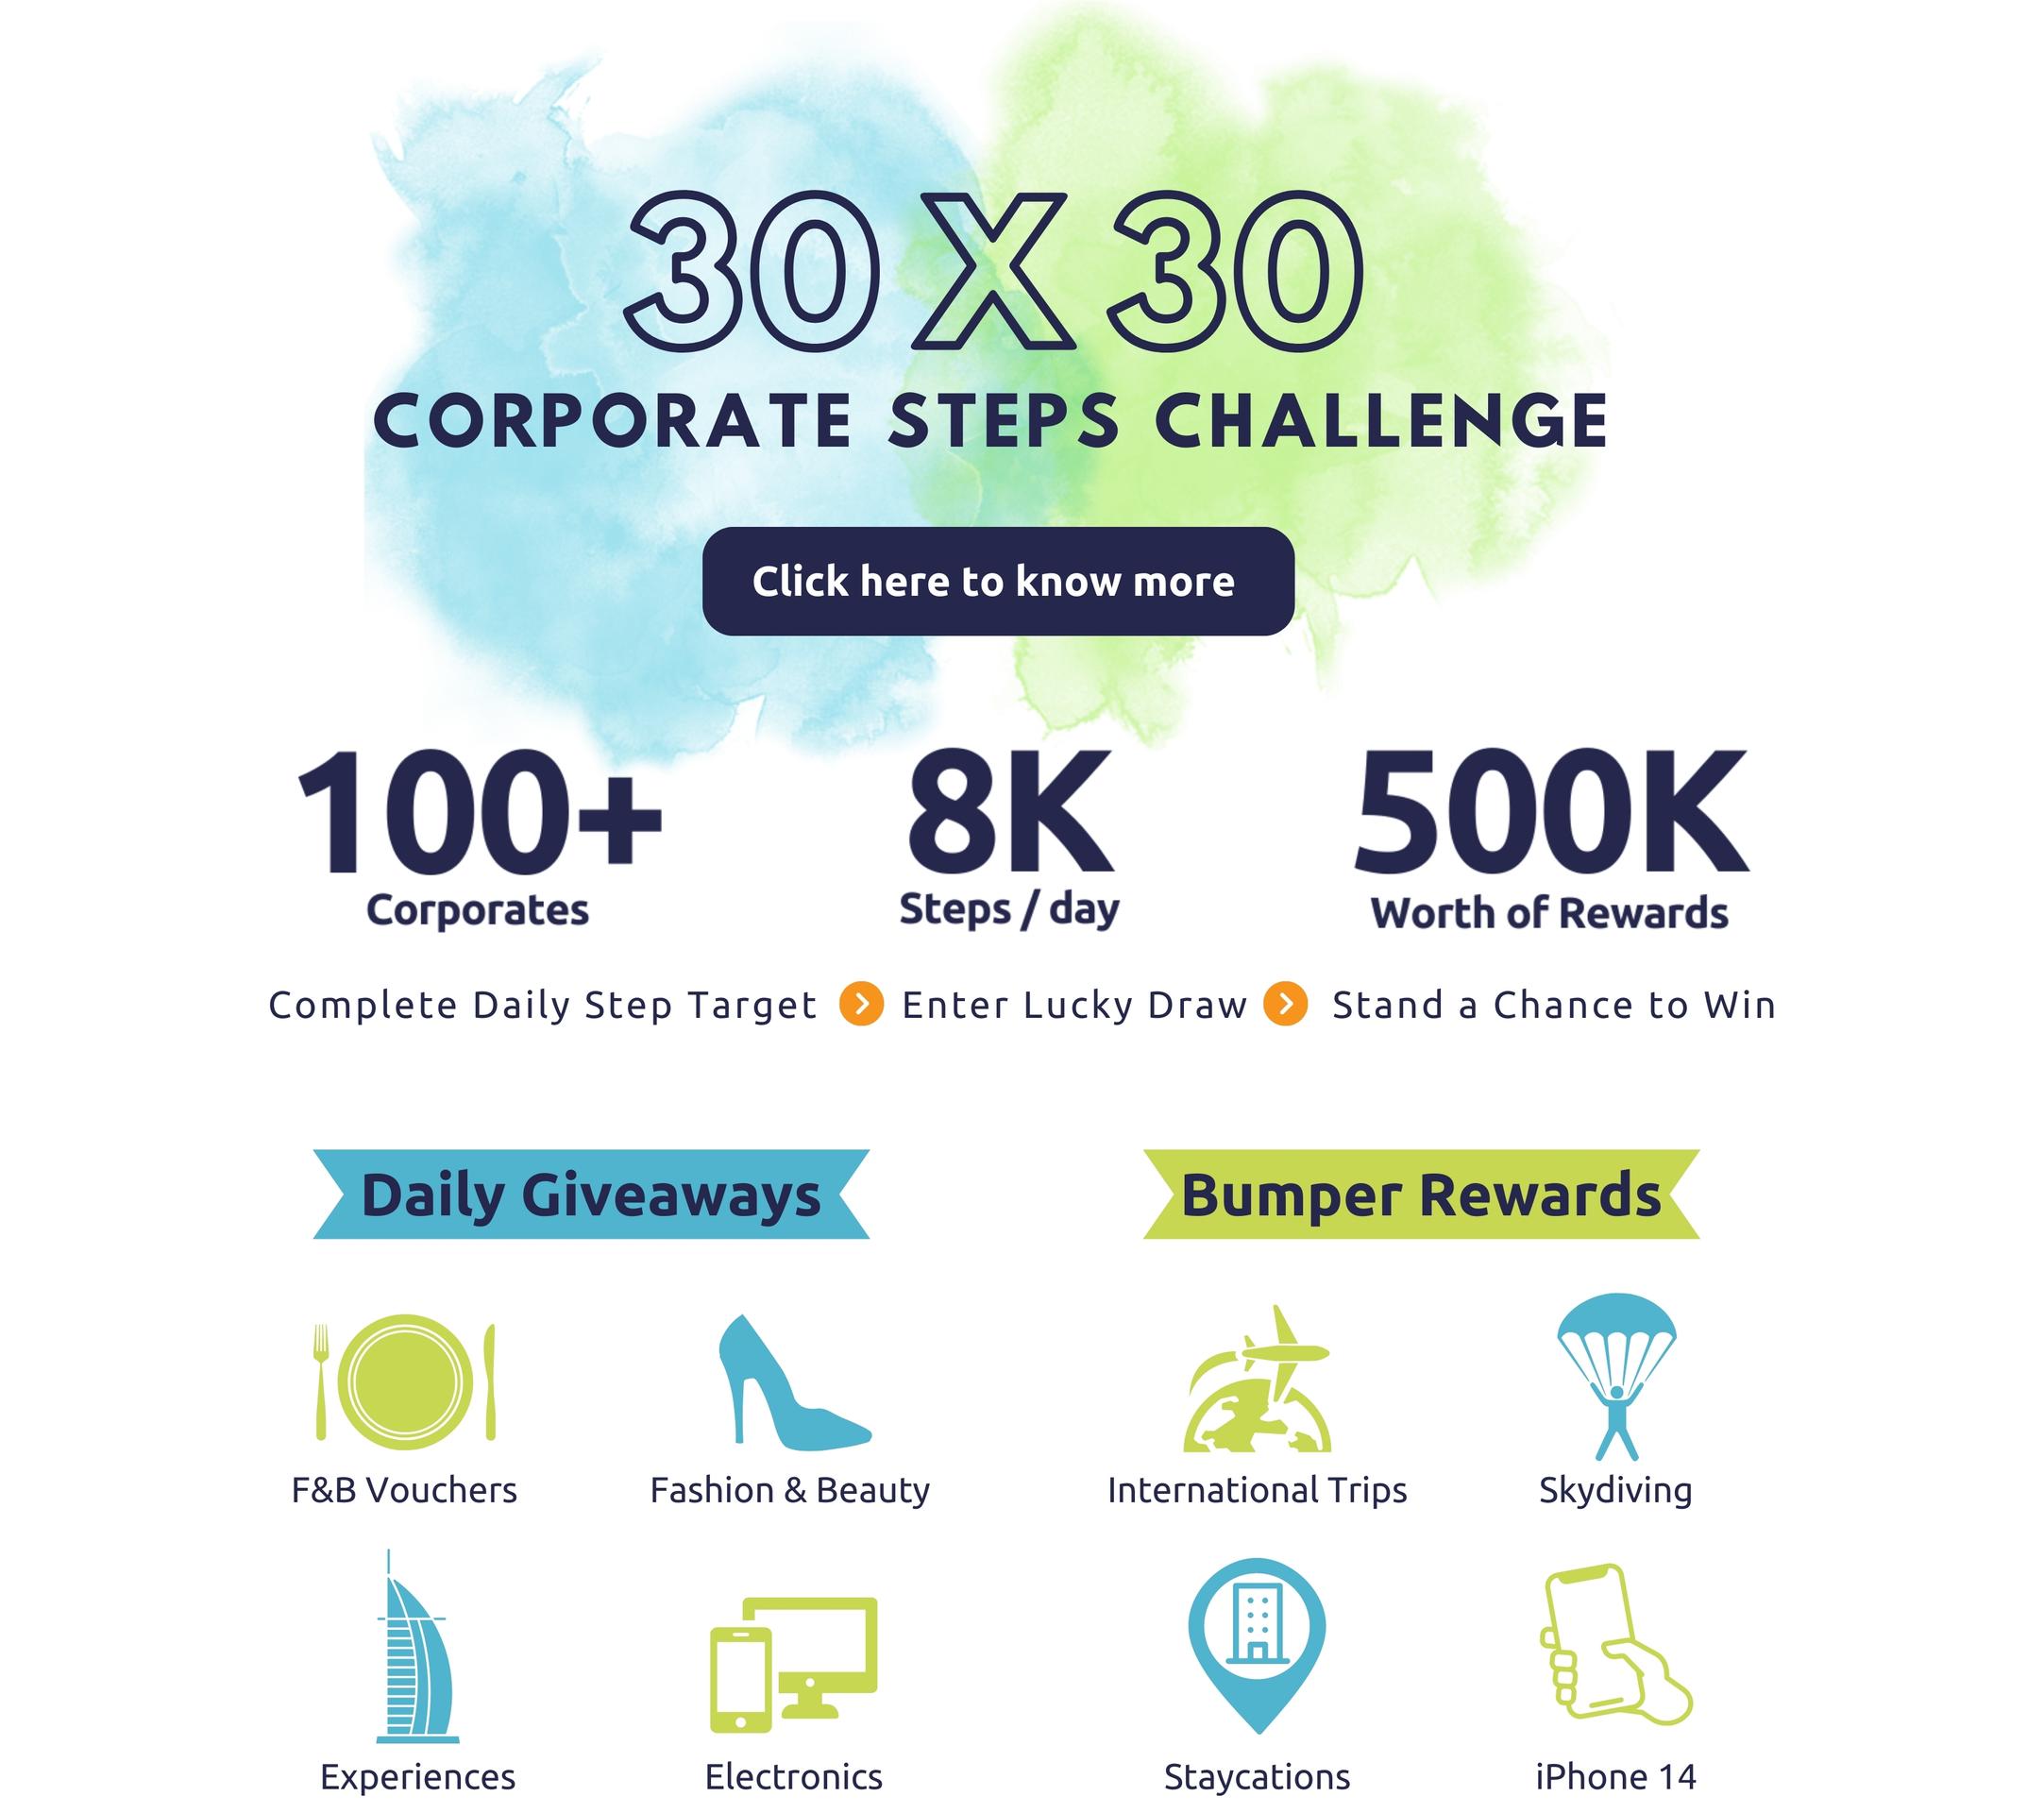 30x30 corpororate steps challenge. 100+ corporates. 8k steps/day. 500k worth of rewards. F&B vouchers, Fashion & beauty. international trips, skydiving, experiences, electronics, staycations, iPhone 14